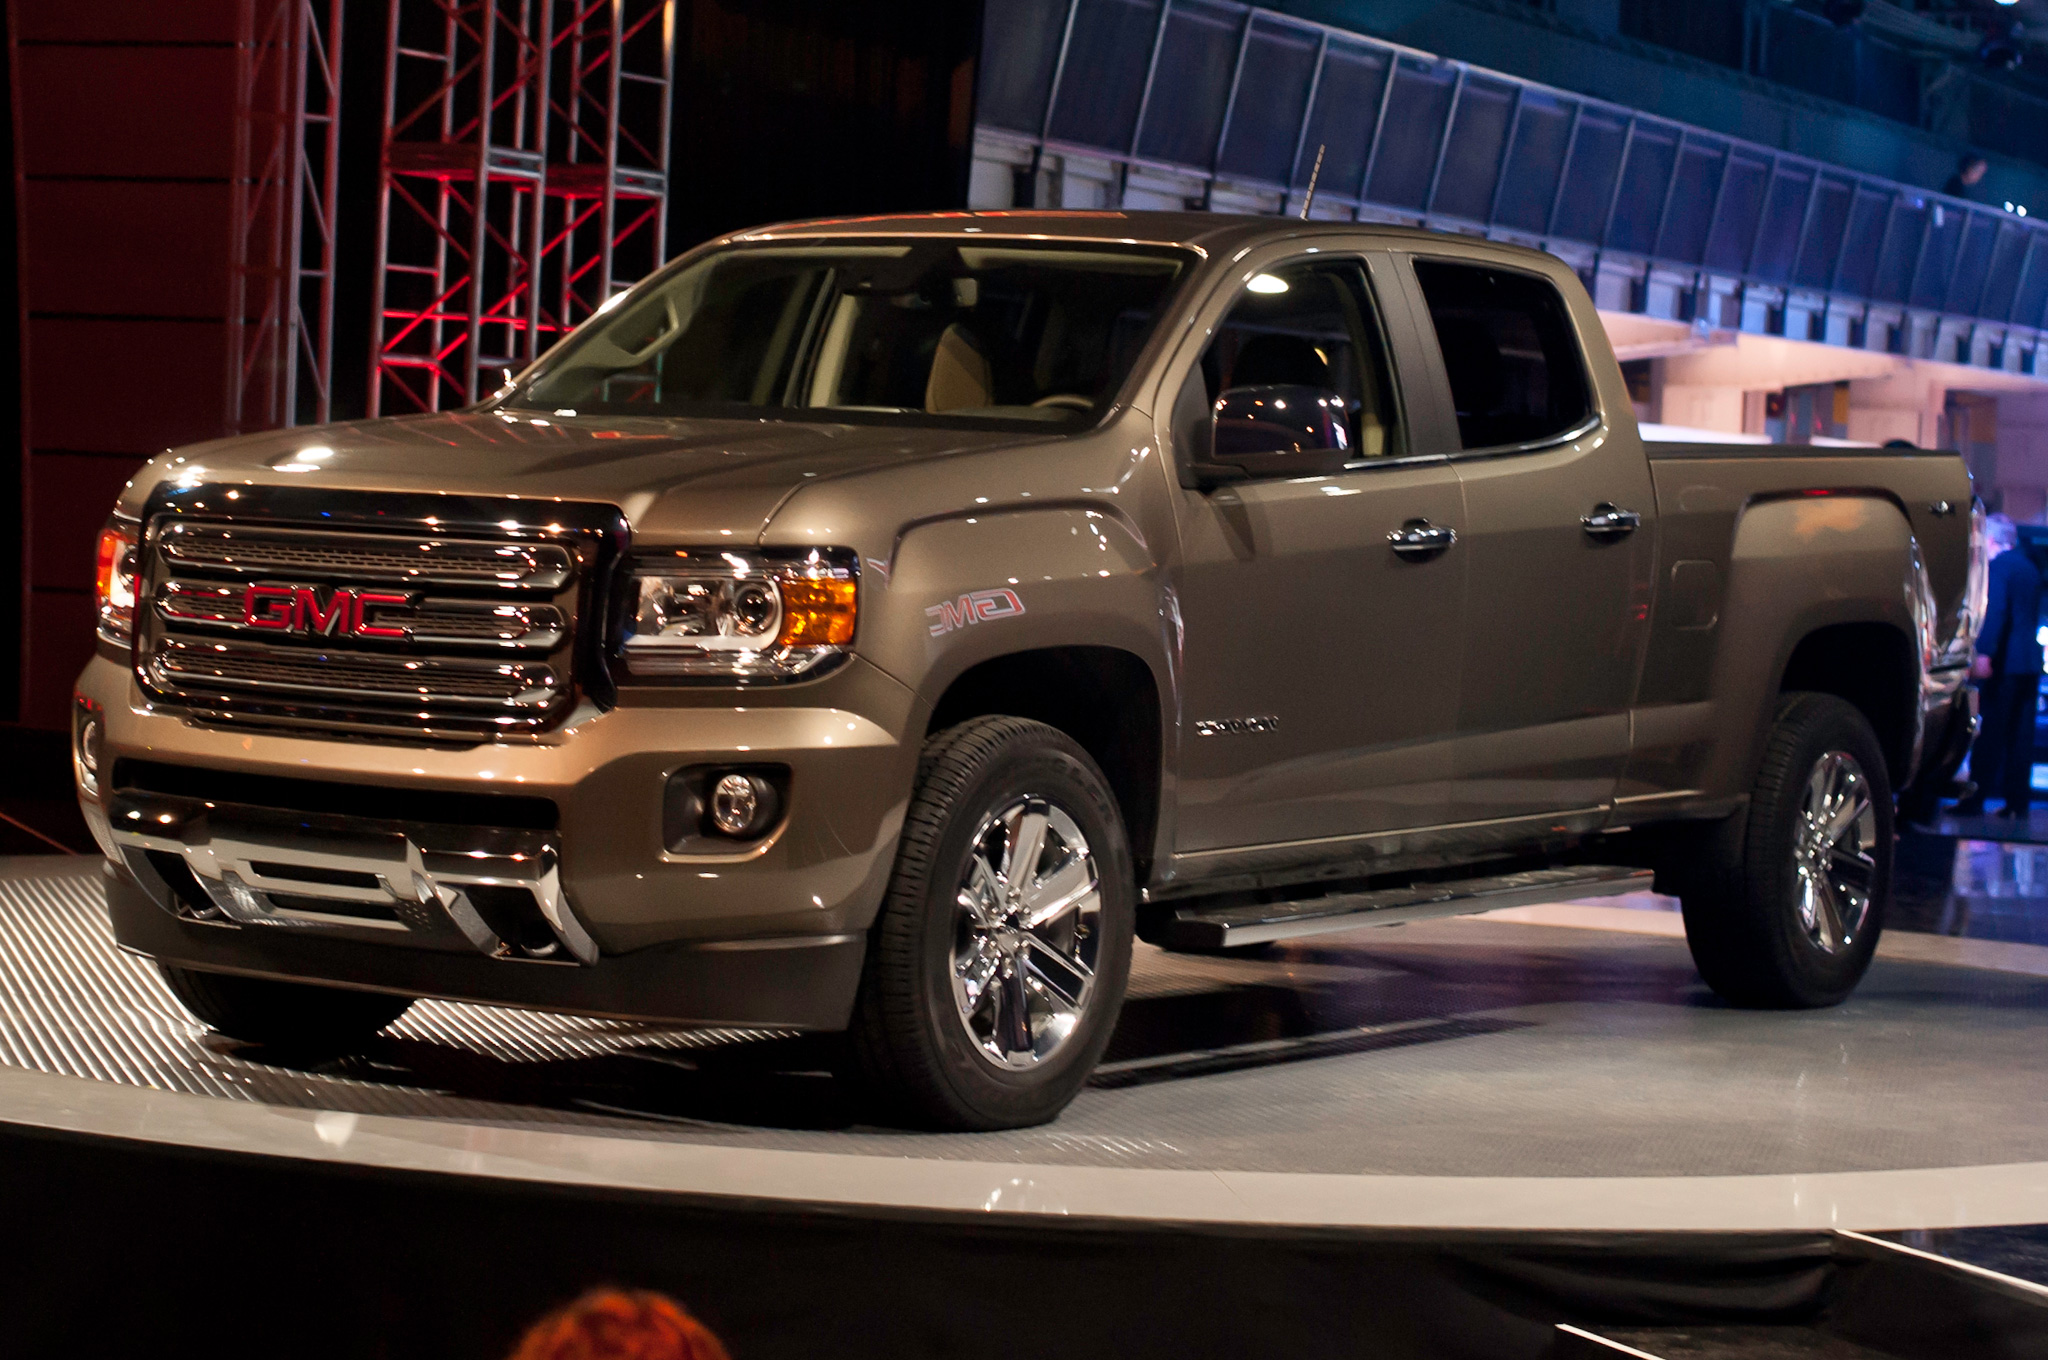 GMC Canyon picture # 106570 | GMC photo gallery | CarsBase.com